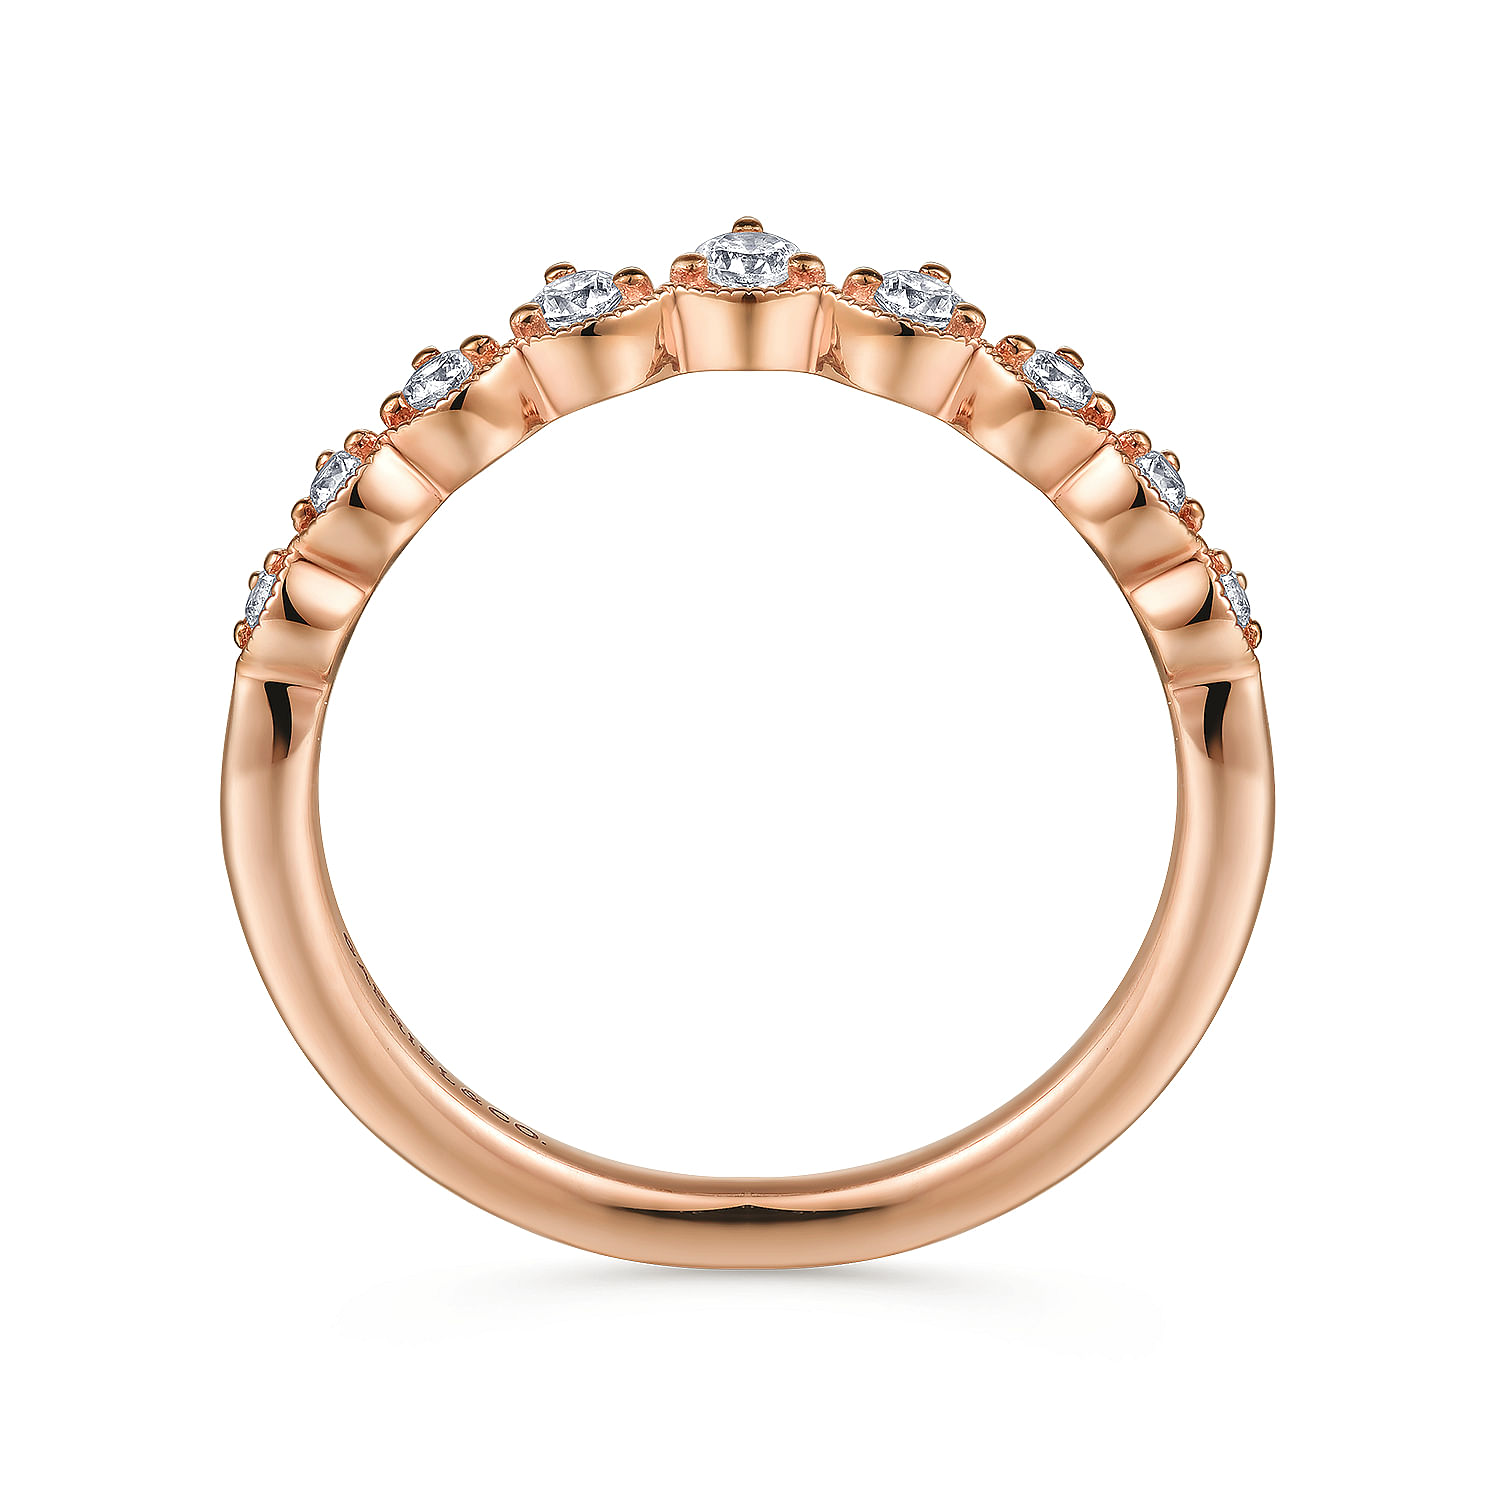 Vintage Inspired 14K Rose Gold Curved Diamond Anniversary Band